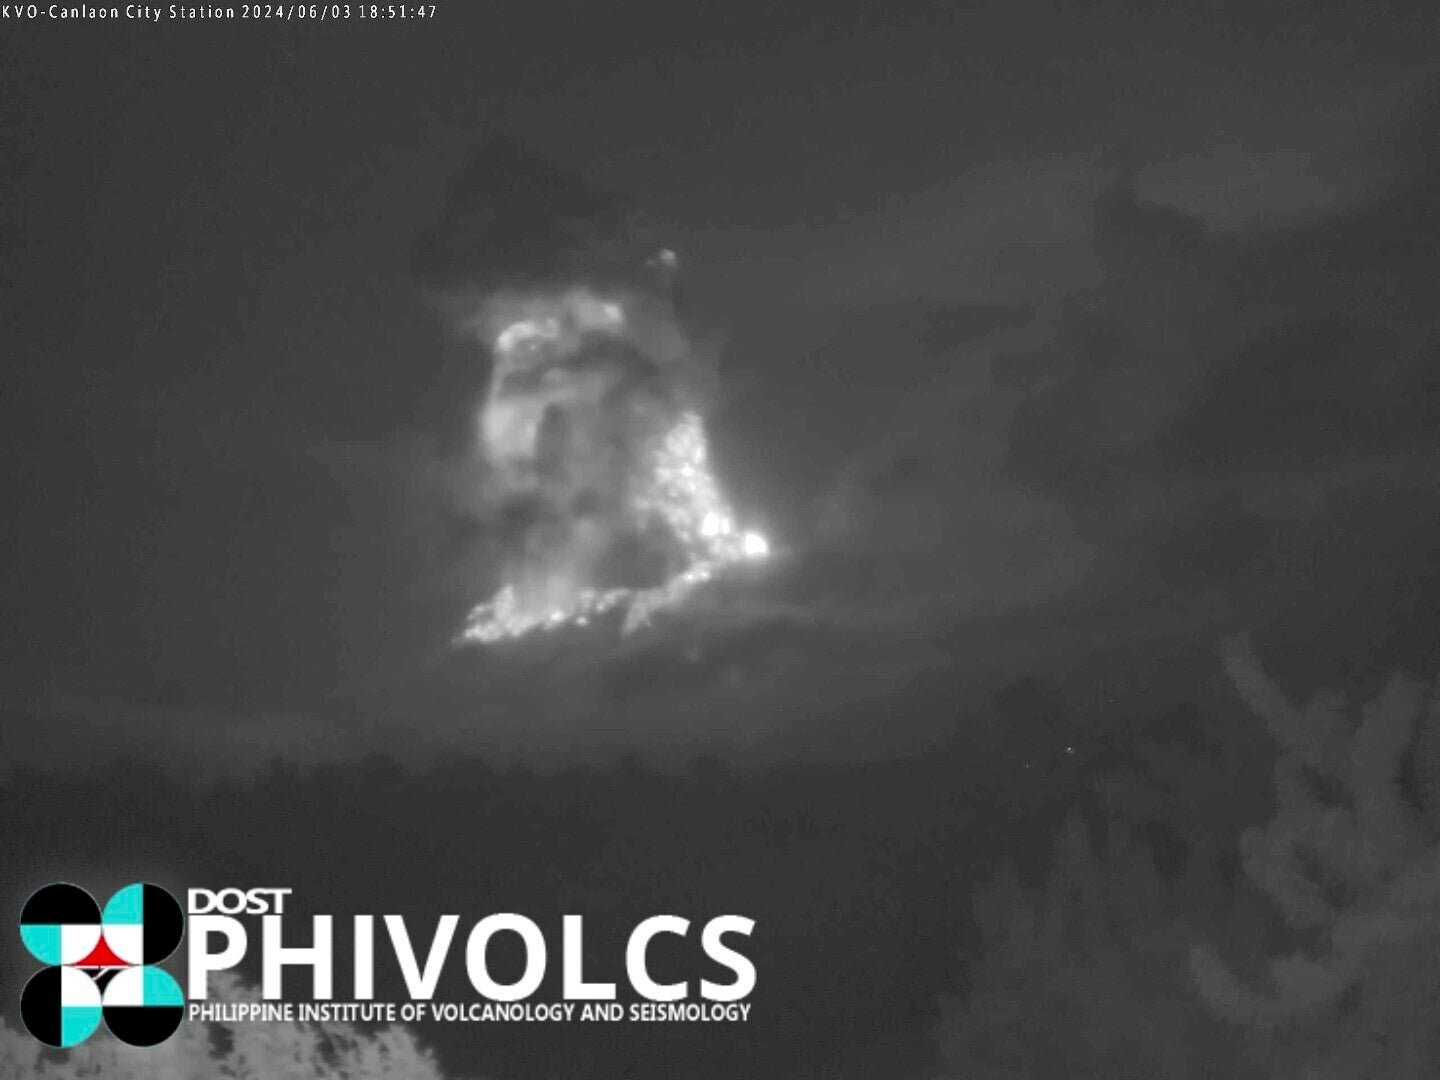 This grab taken from a thermal camera on June 3 shows the Kanlaon volcano erupting in Canlaon City, Negros, Philippines